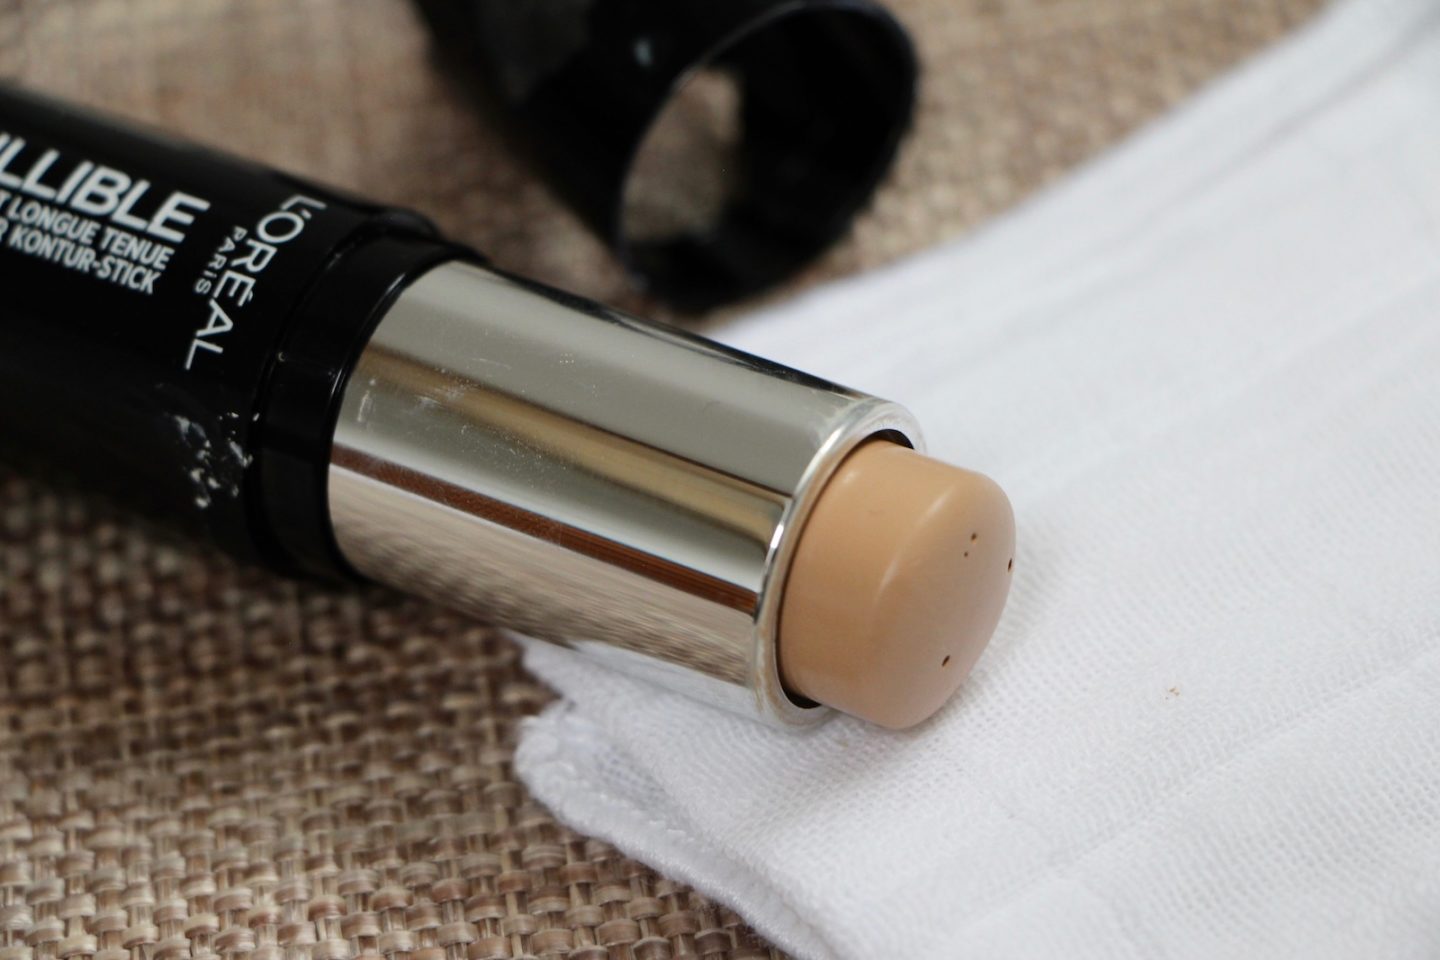 l'oreal infallible foundation stick review